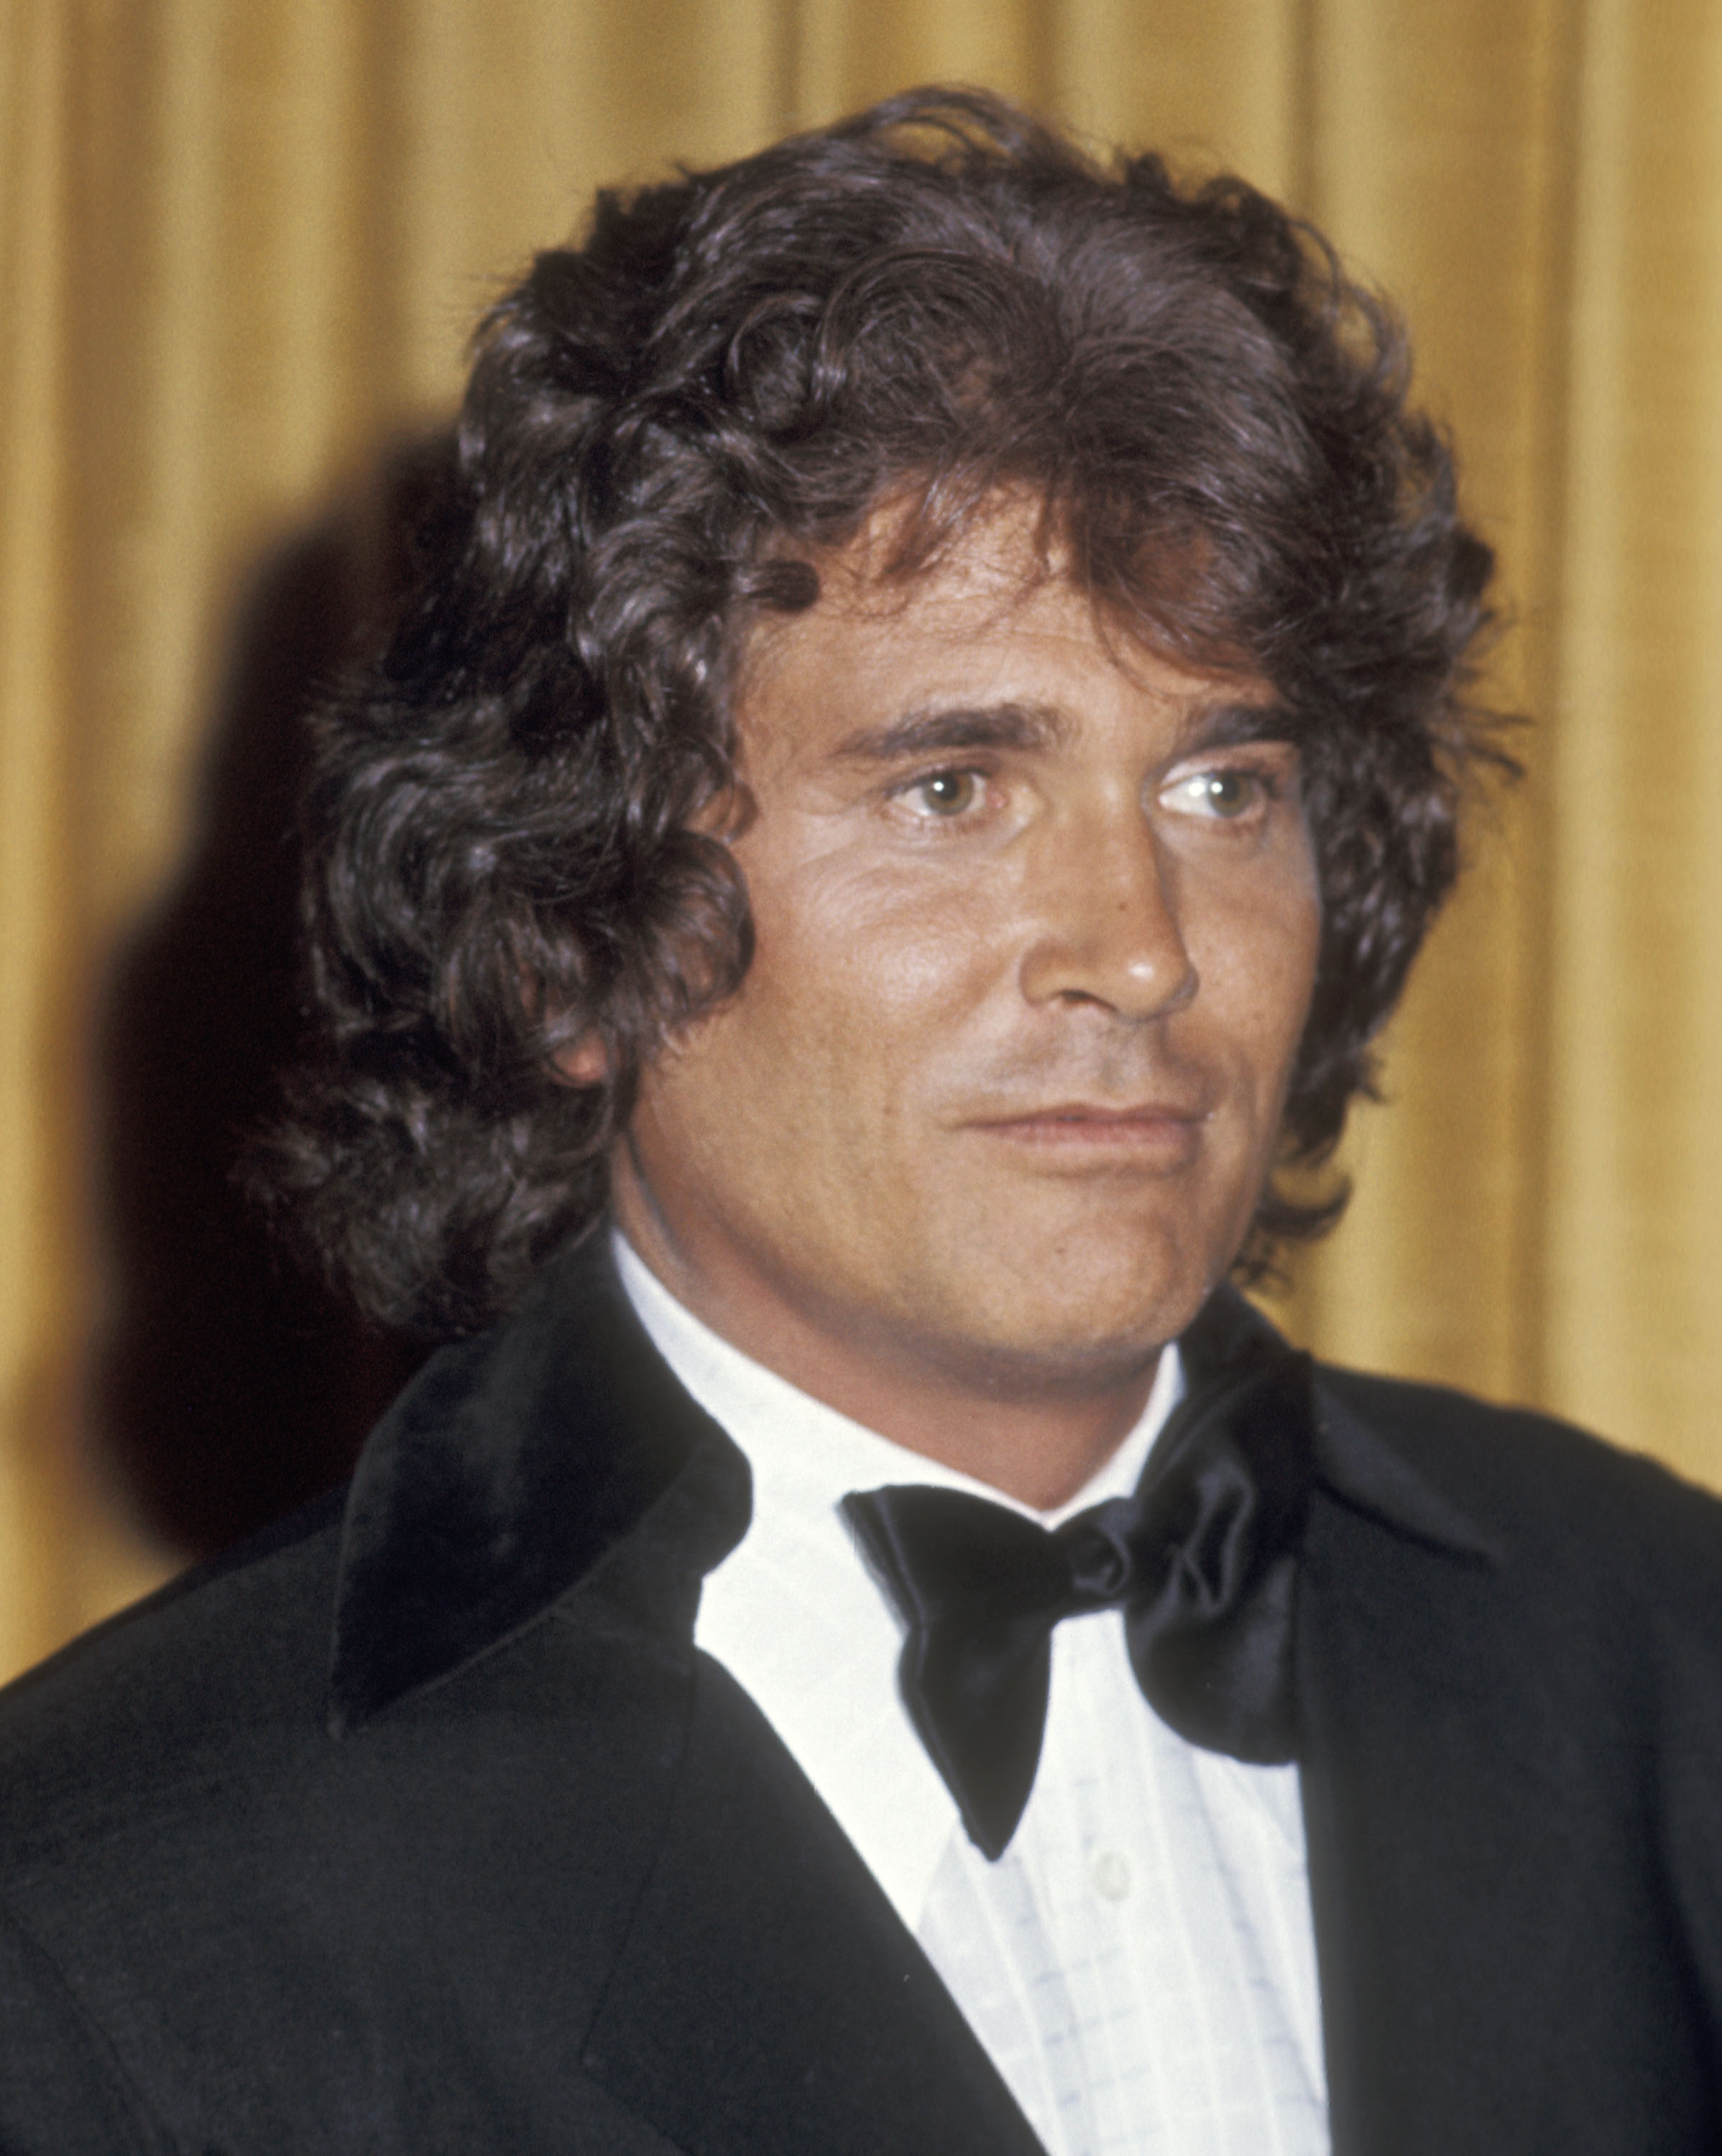 Michael Landon attends the Hollywood Radio and Television Society's 16th Annual International Broadcasting Awards on March 4, 1976 at Century Plaza Hotel in Los Angeles, California. | Source: Getty Images